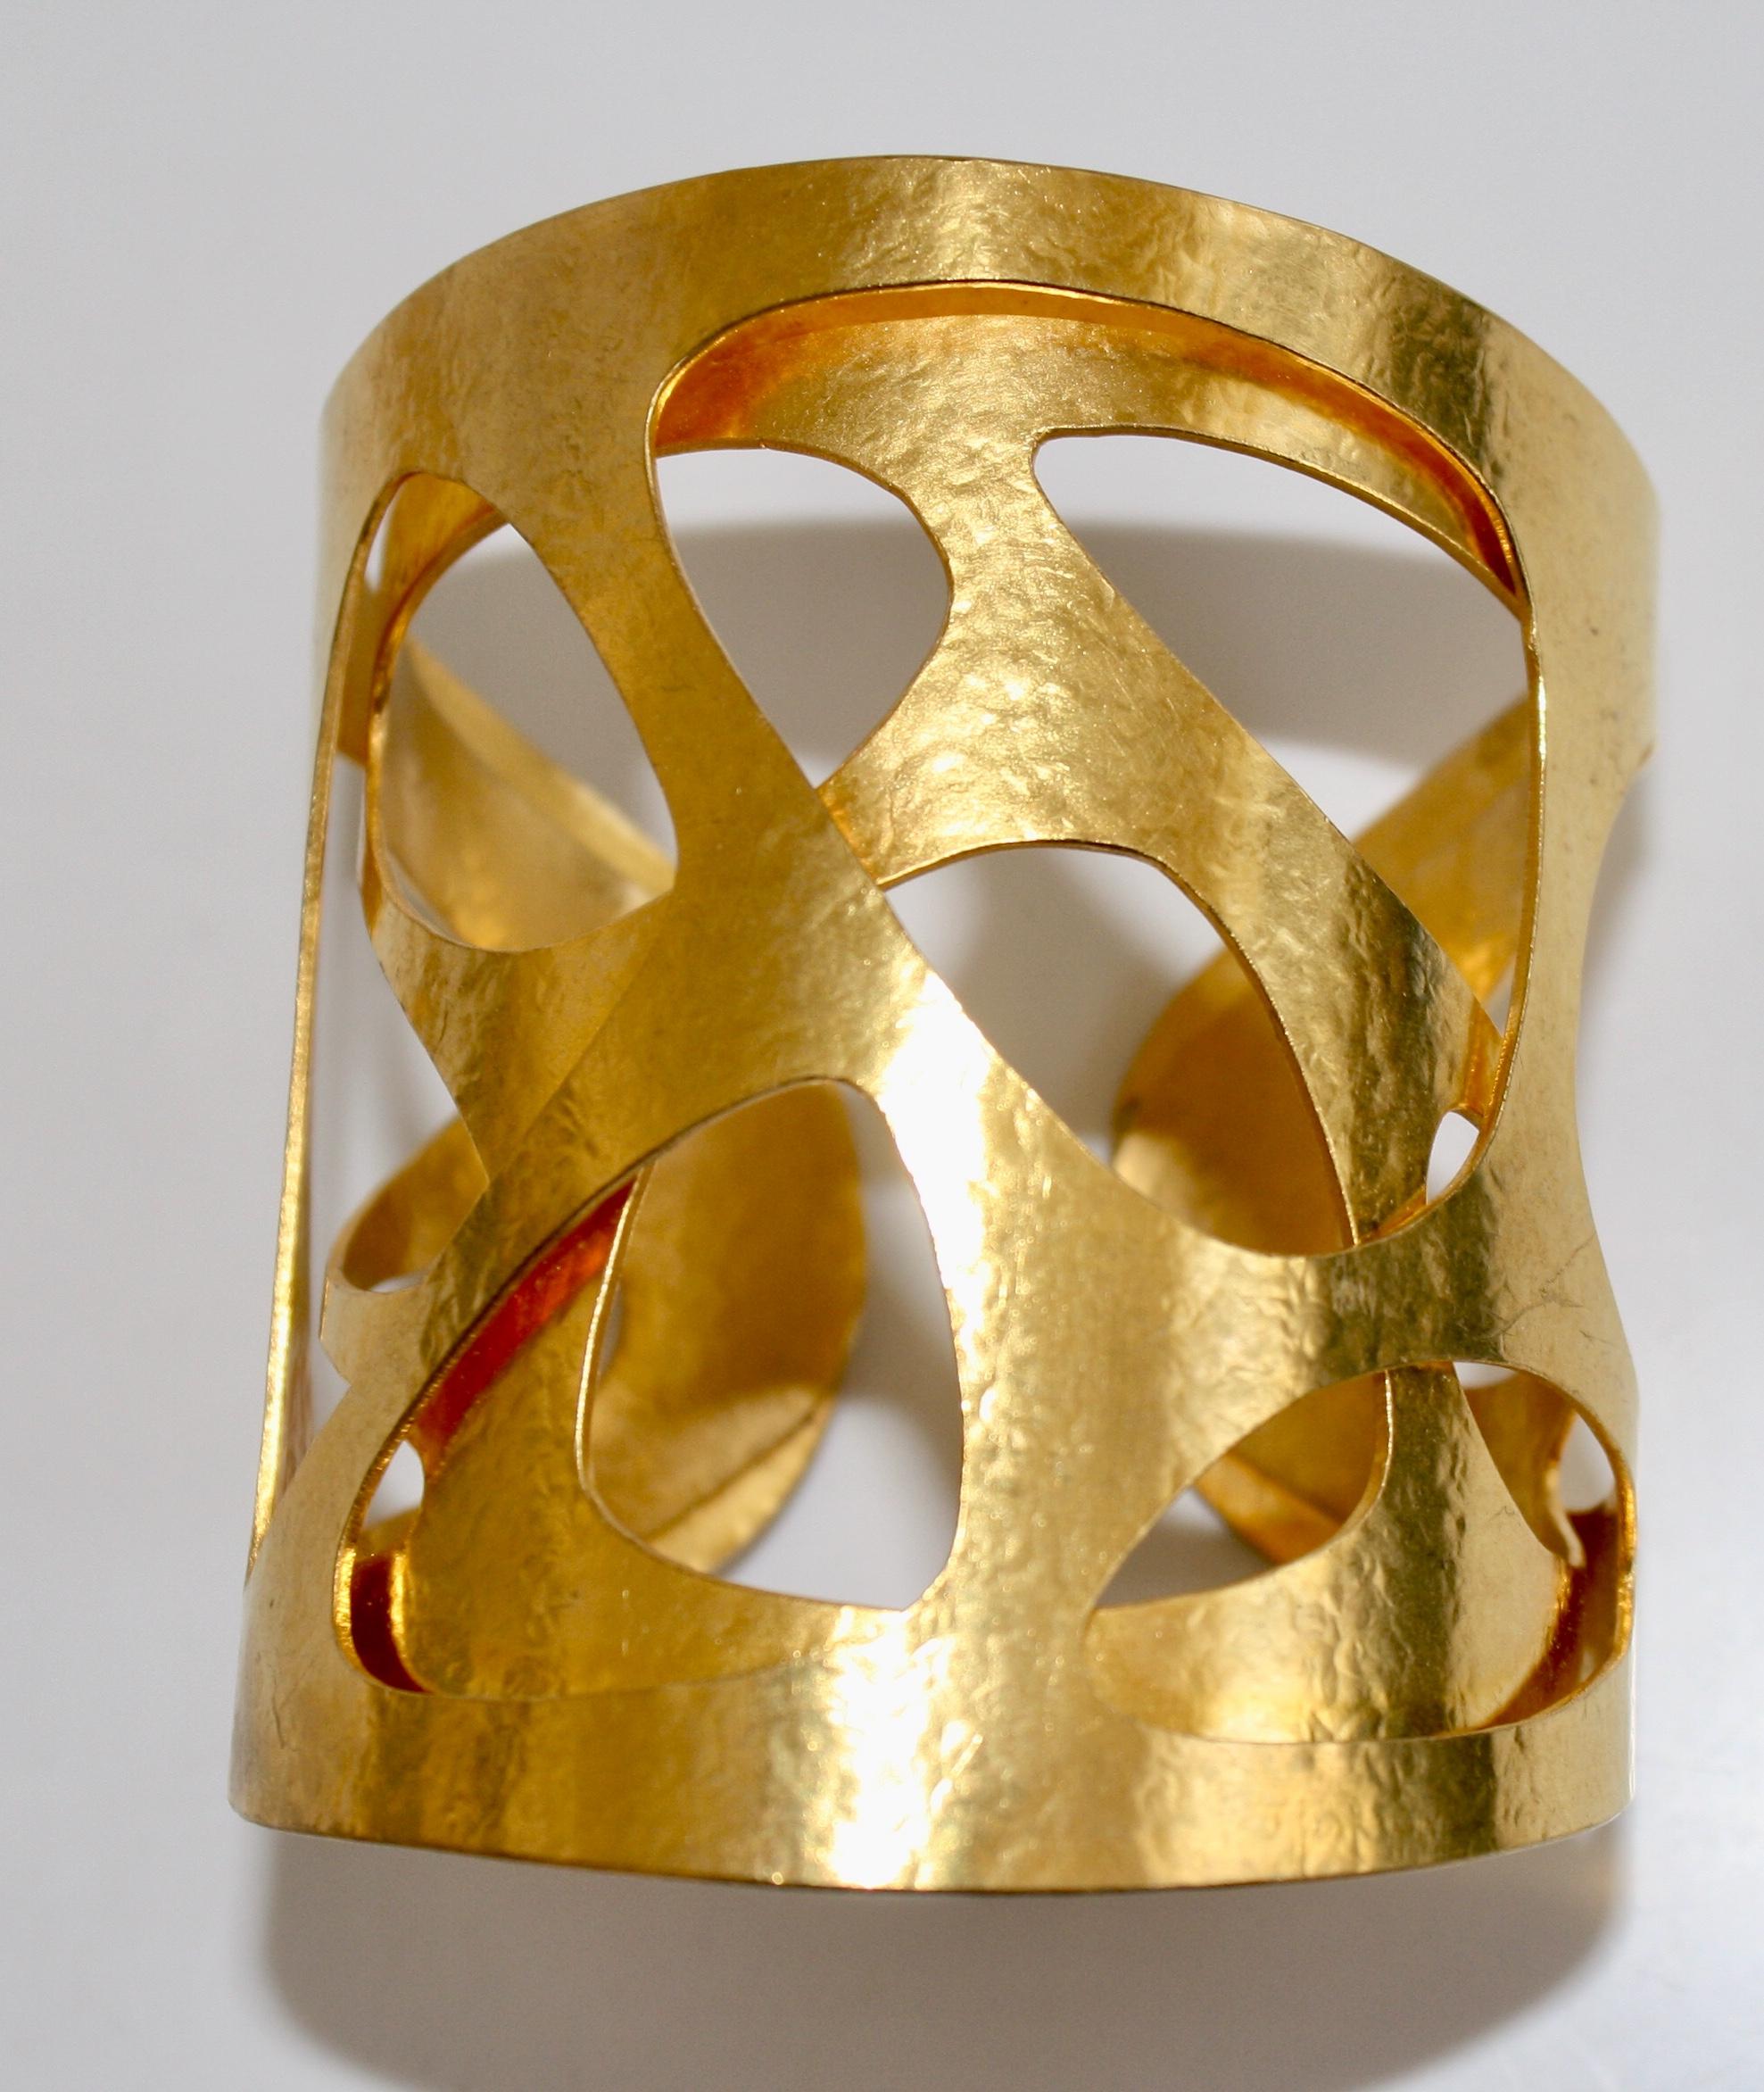 Gilded brass Giraffe cuff from Herve van der Straeten. This designer is no longer producing jewelry, making all remaining pieces collectors items. Cuff is adjustable, fits wrists both large and small. 